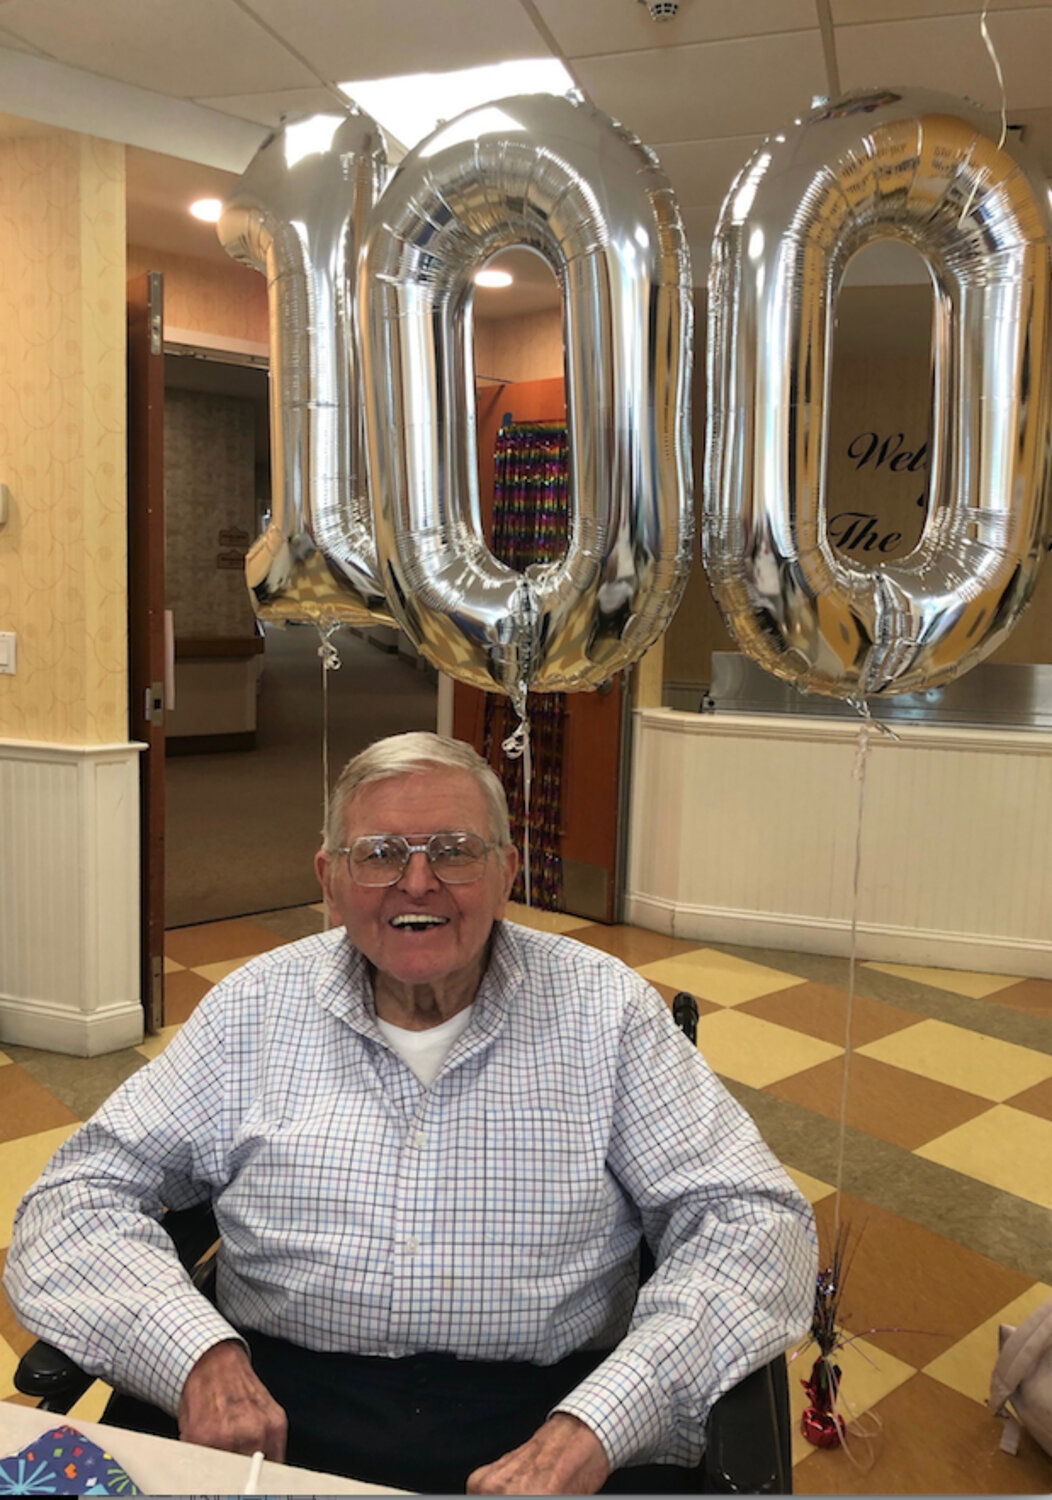 Seymour Sinuk, a resident of the Belair Nursing and Rehabilitation Center in North Bellmore, turned 100 on Aug. 22.